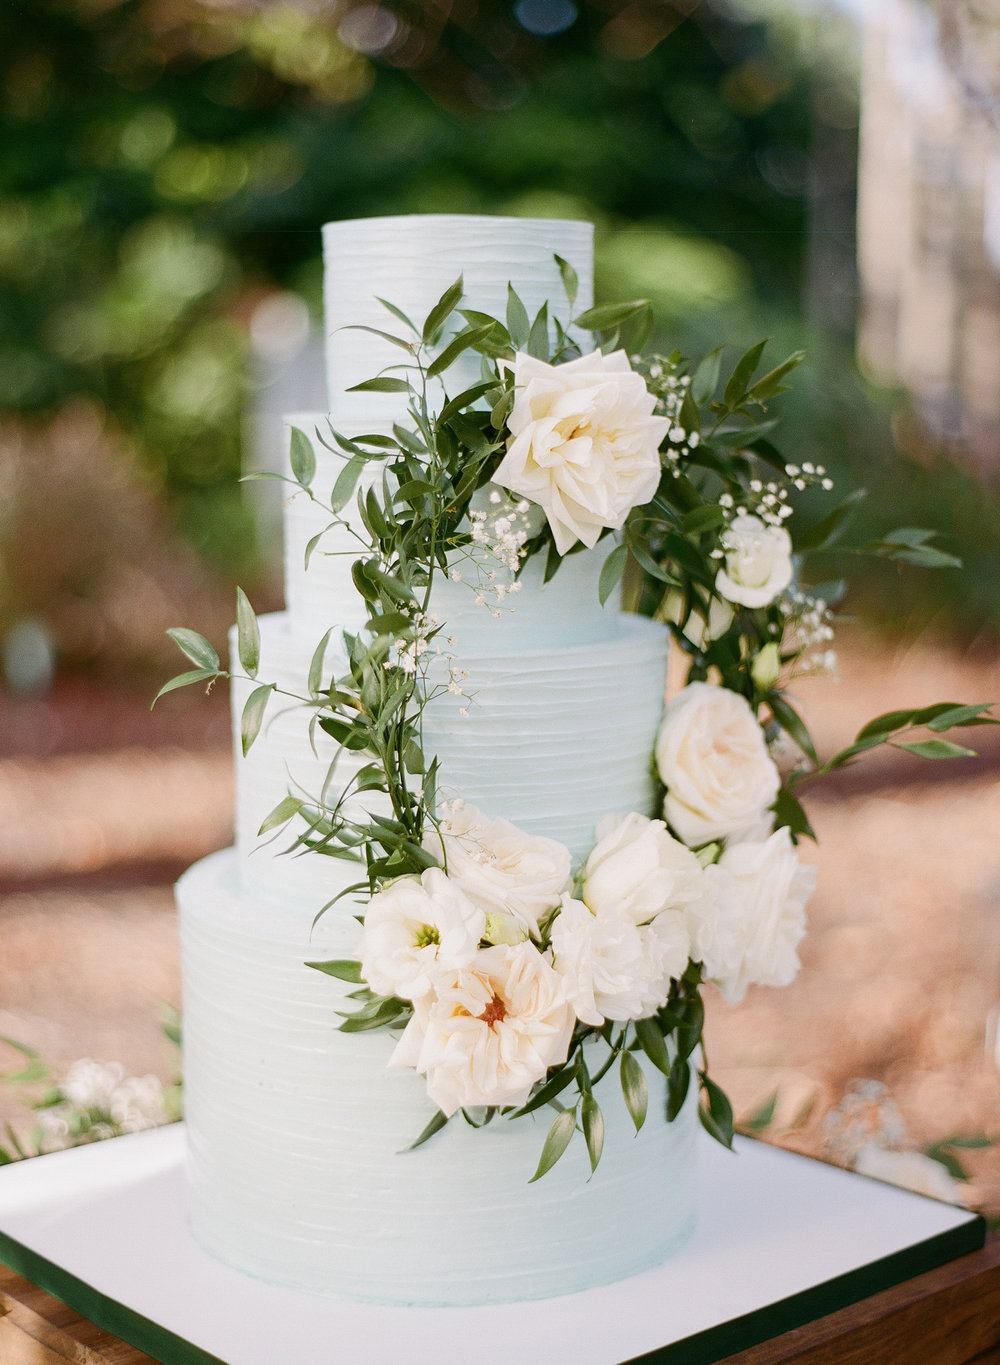 Blue Wedding Cake with Real Flower